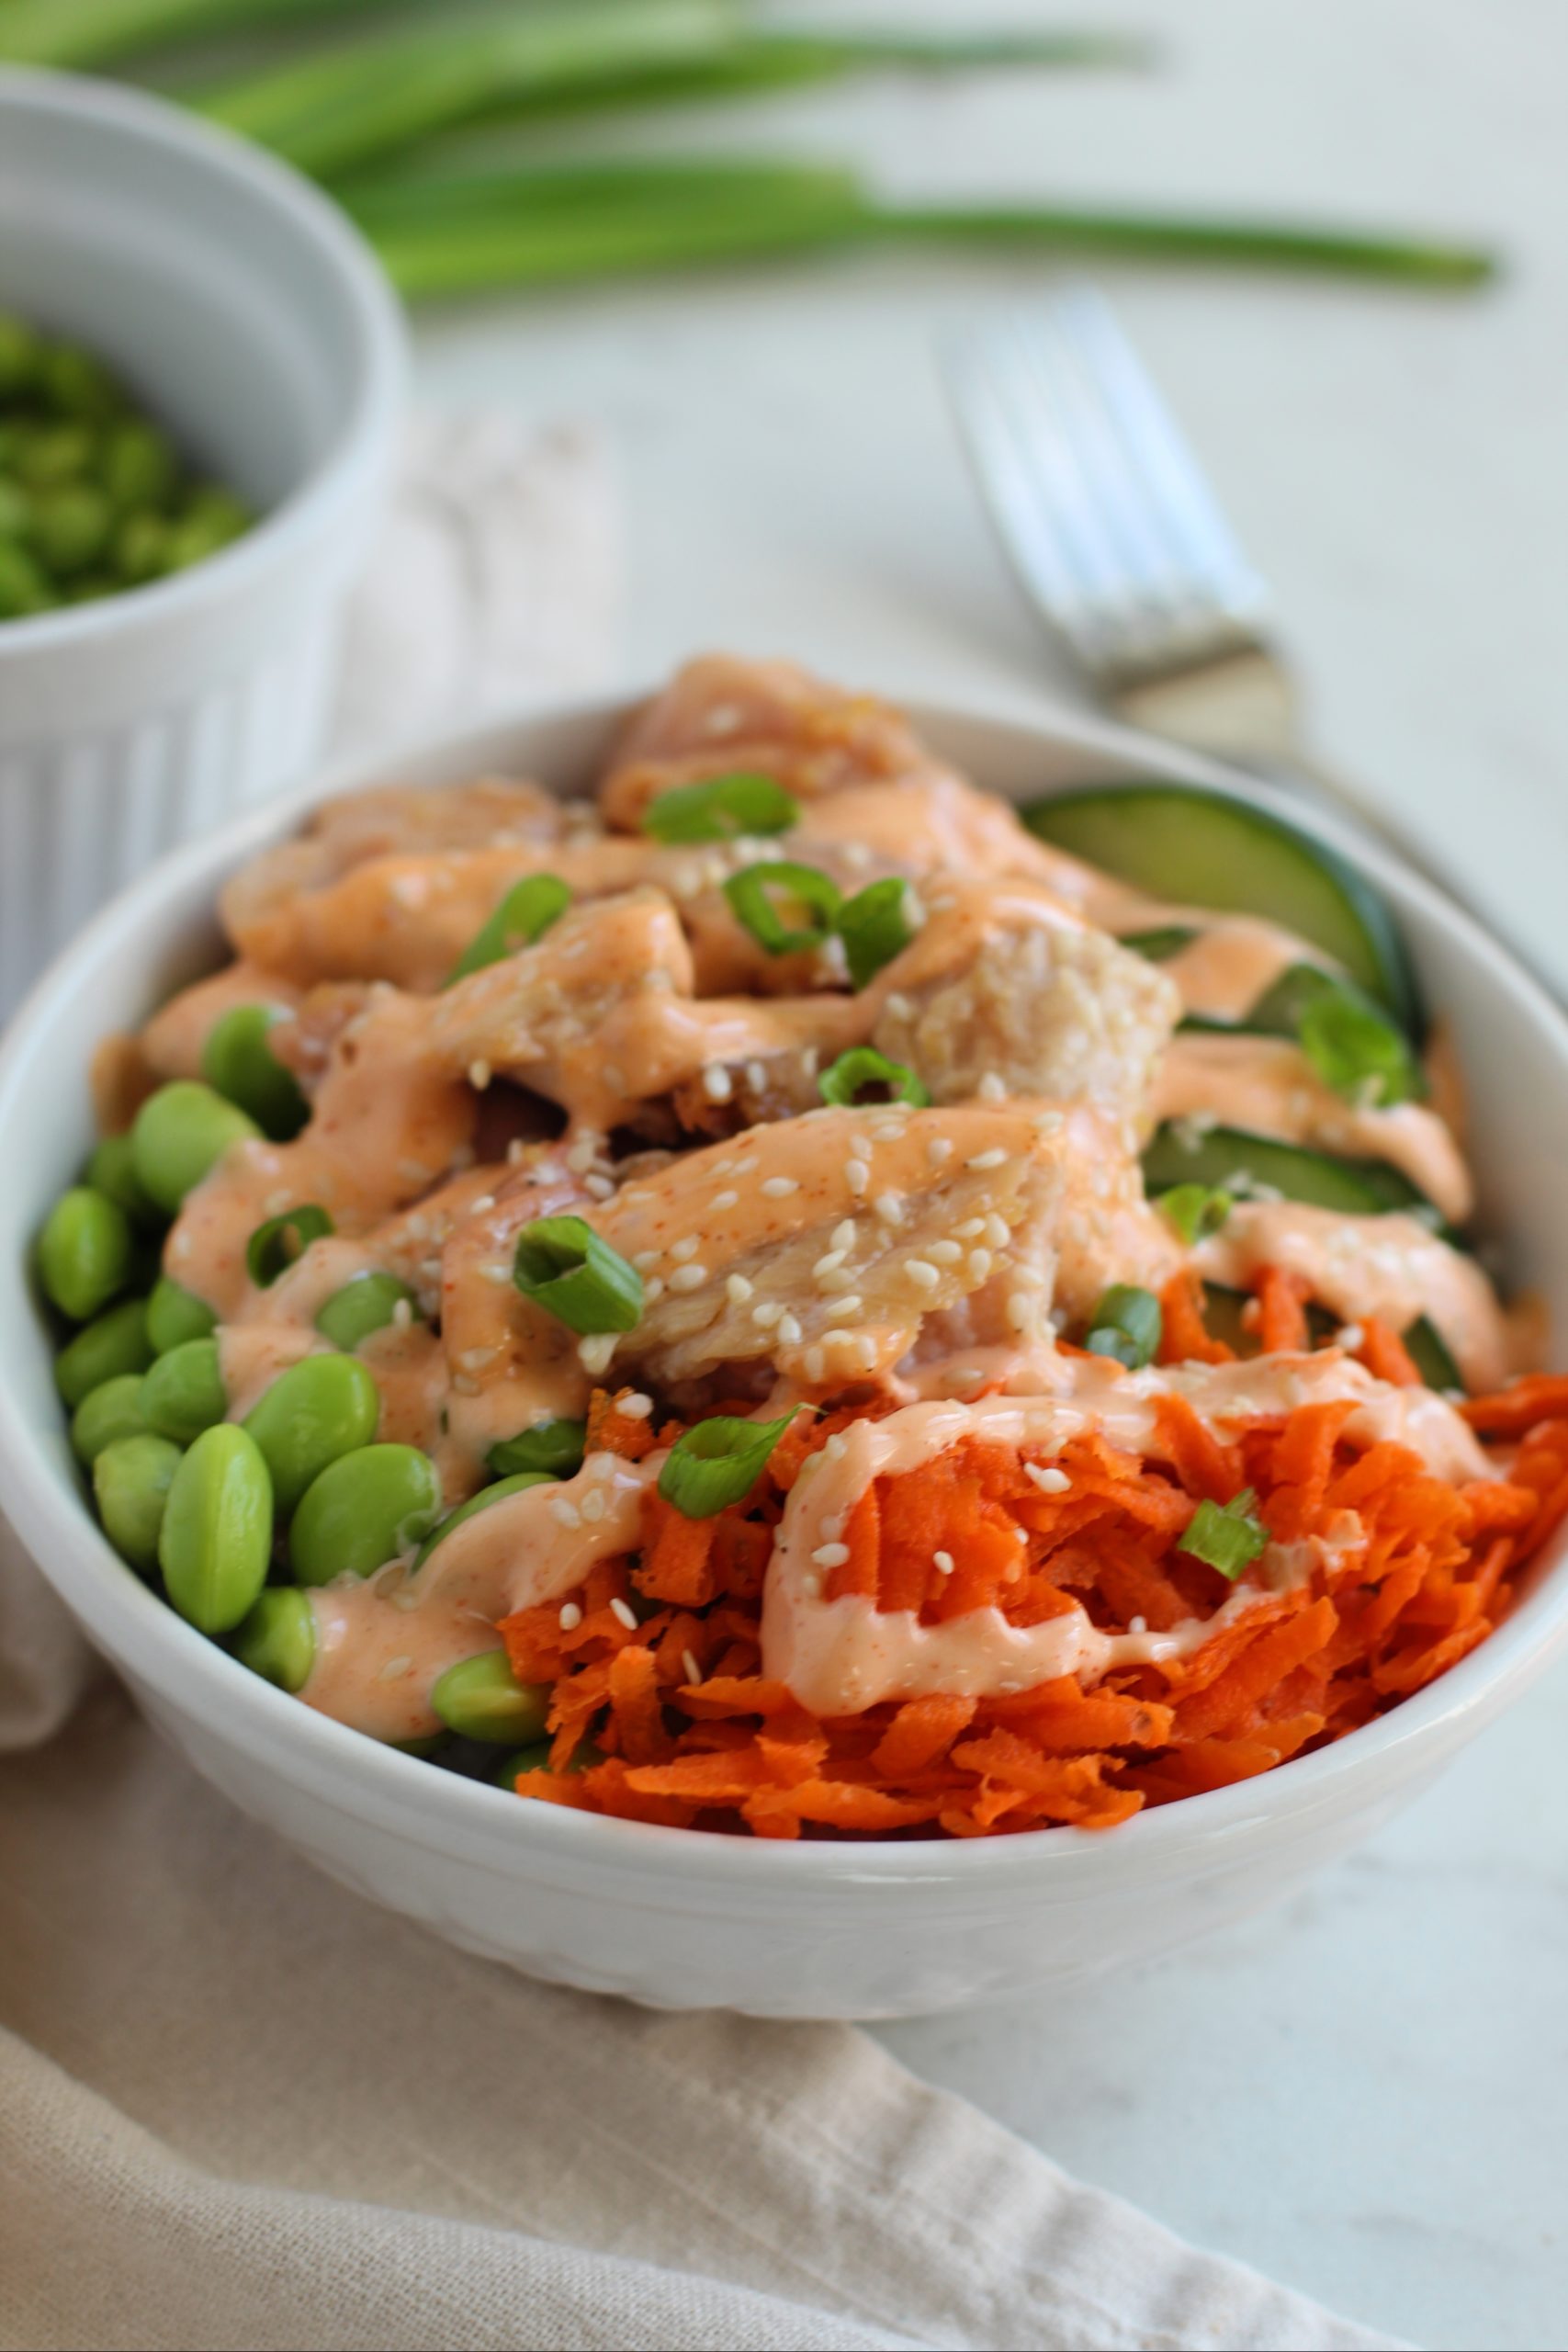 Top shot of the salmon bowl in close up.